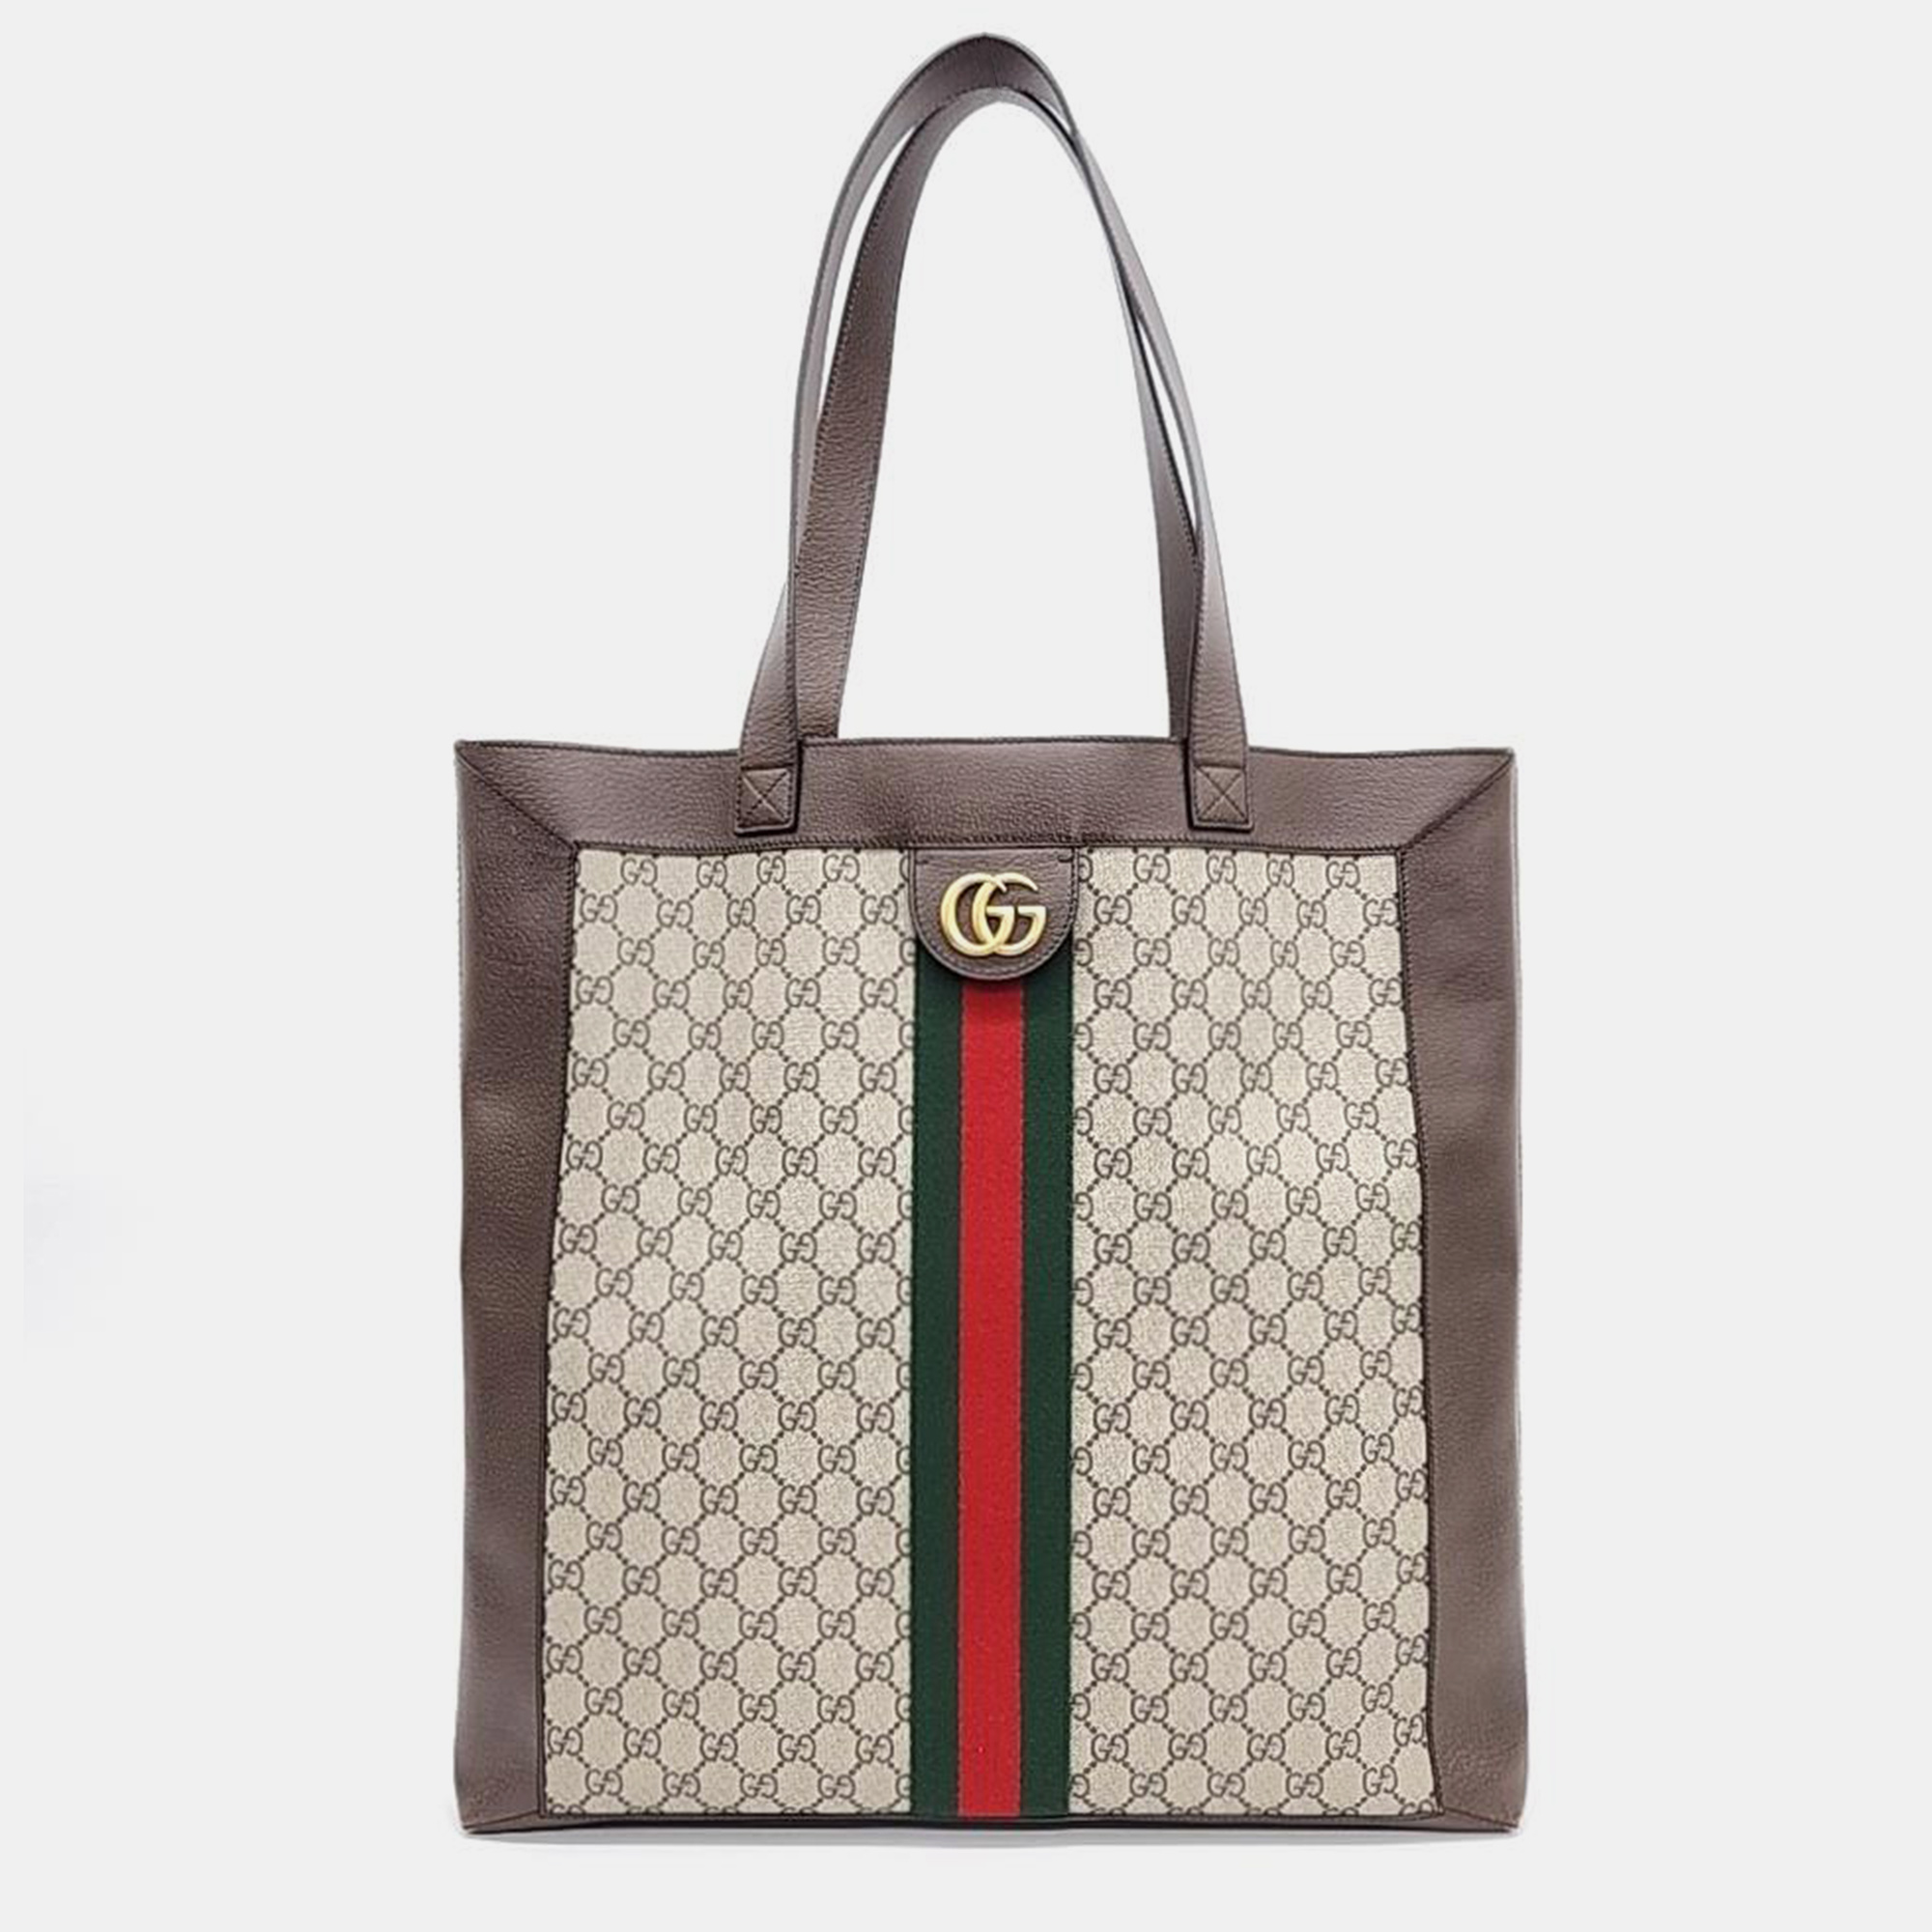 Gucci beige gg canvas ophidia tote bag